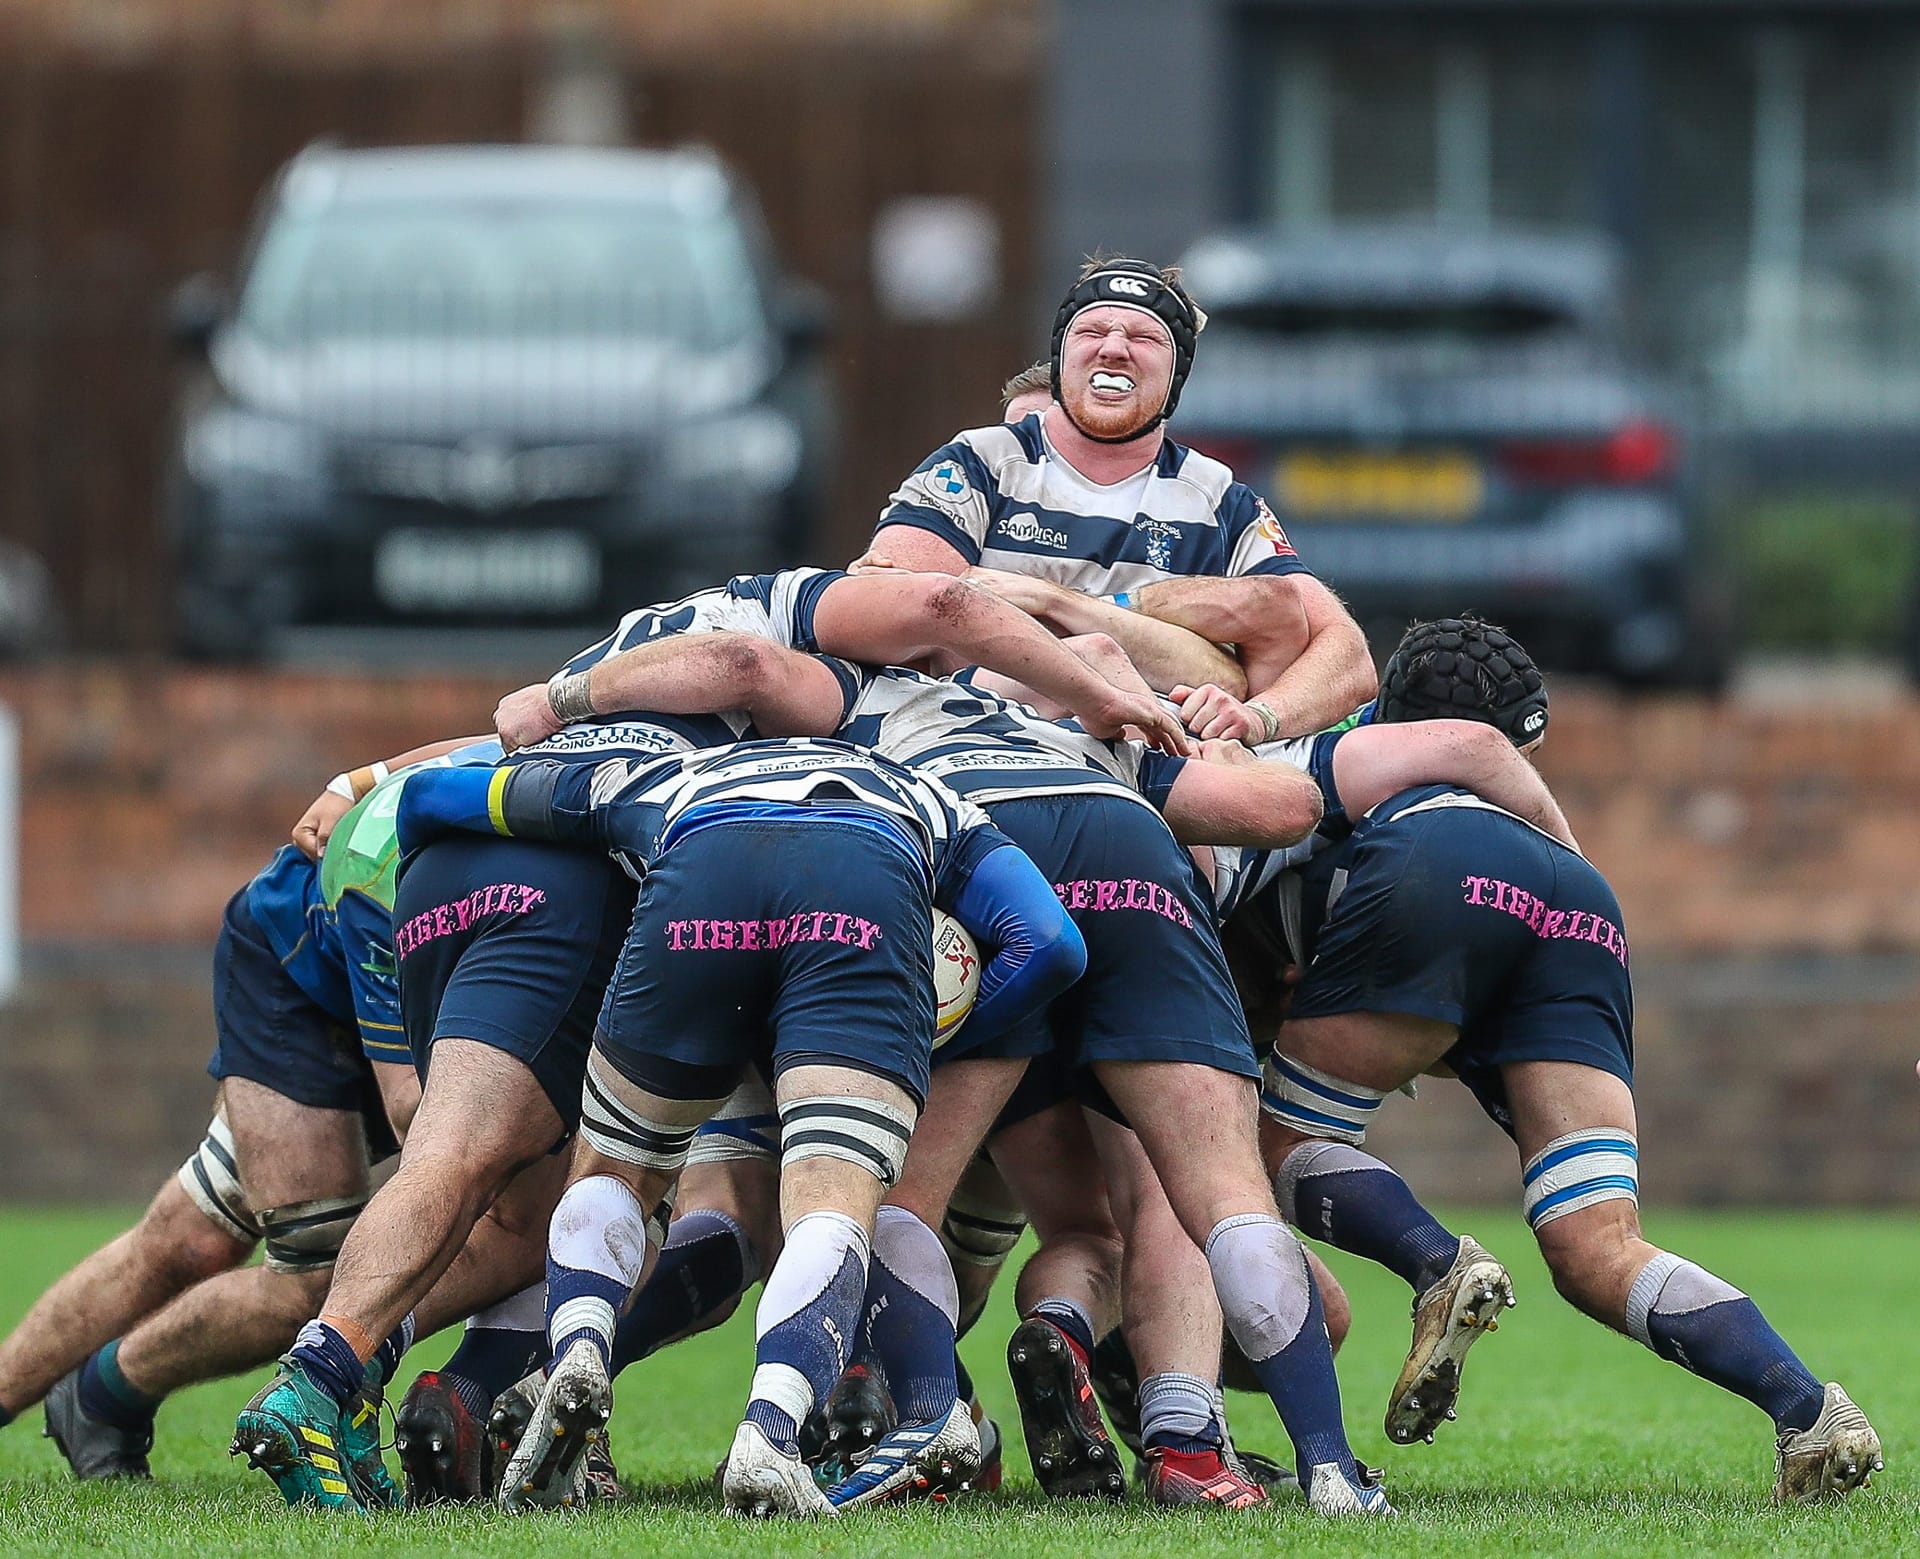 Heriots Fraser Hastie guides the maul forwardFOSROC Super 6 match between Heriot's Rugby and Boroughmuir Bears at Goldenacre, Edinburgh on 09/10/2021. (Photo: 39 Design Photography)